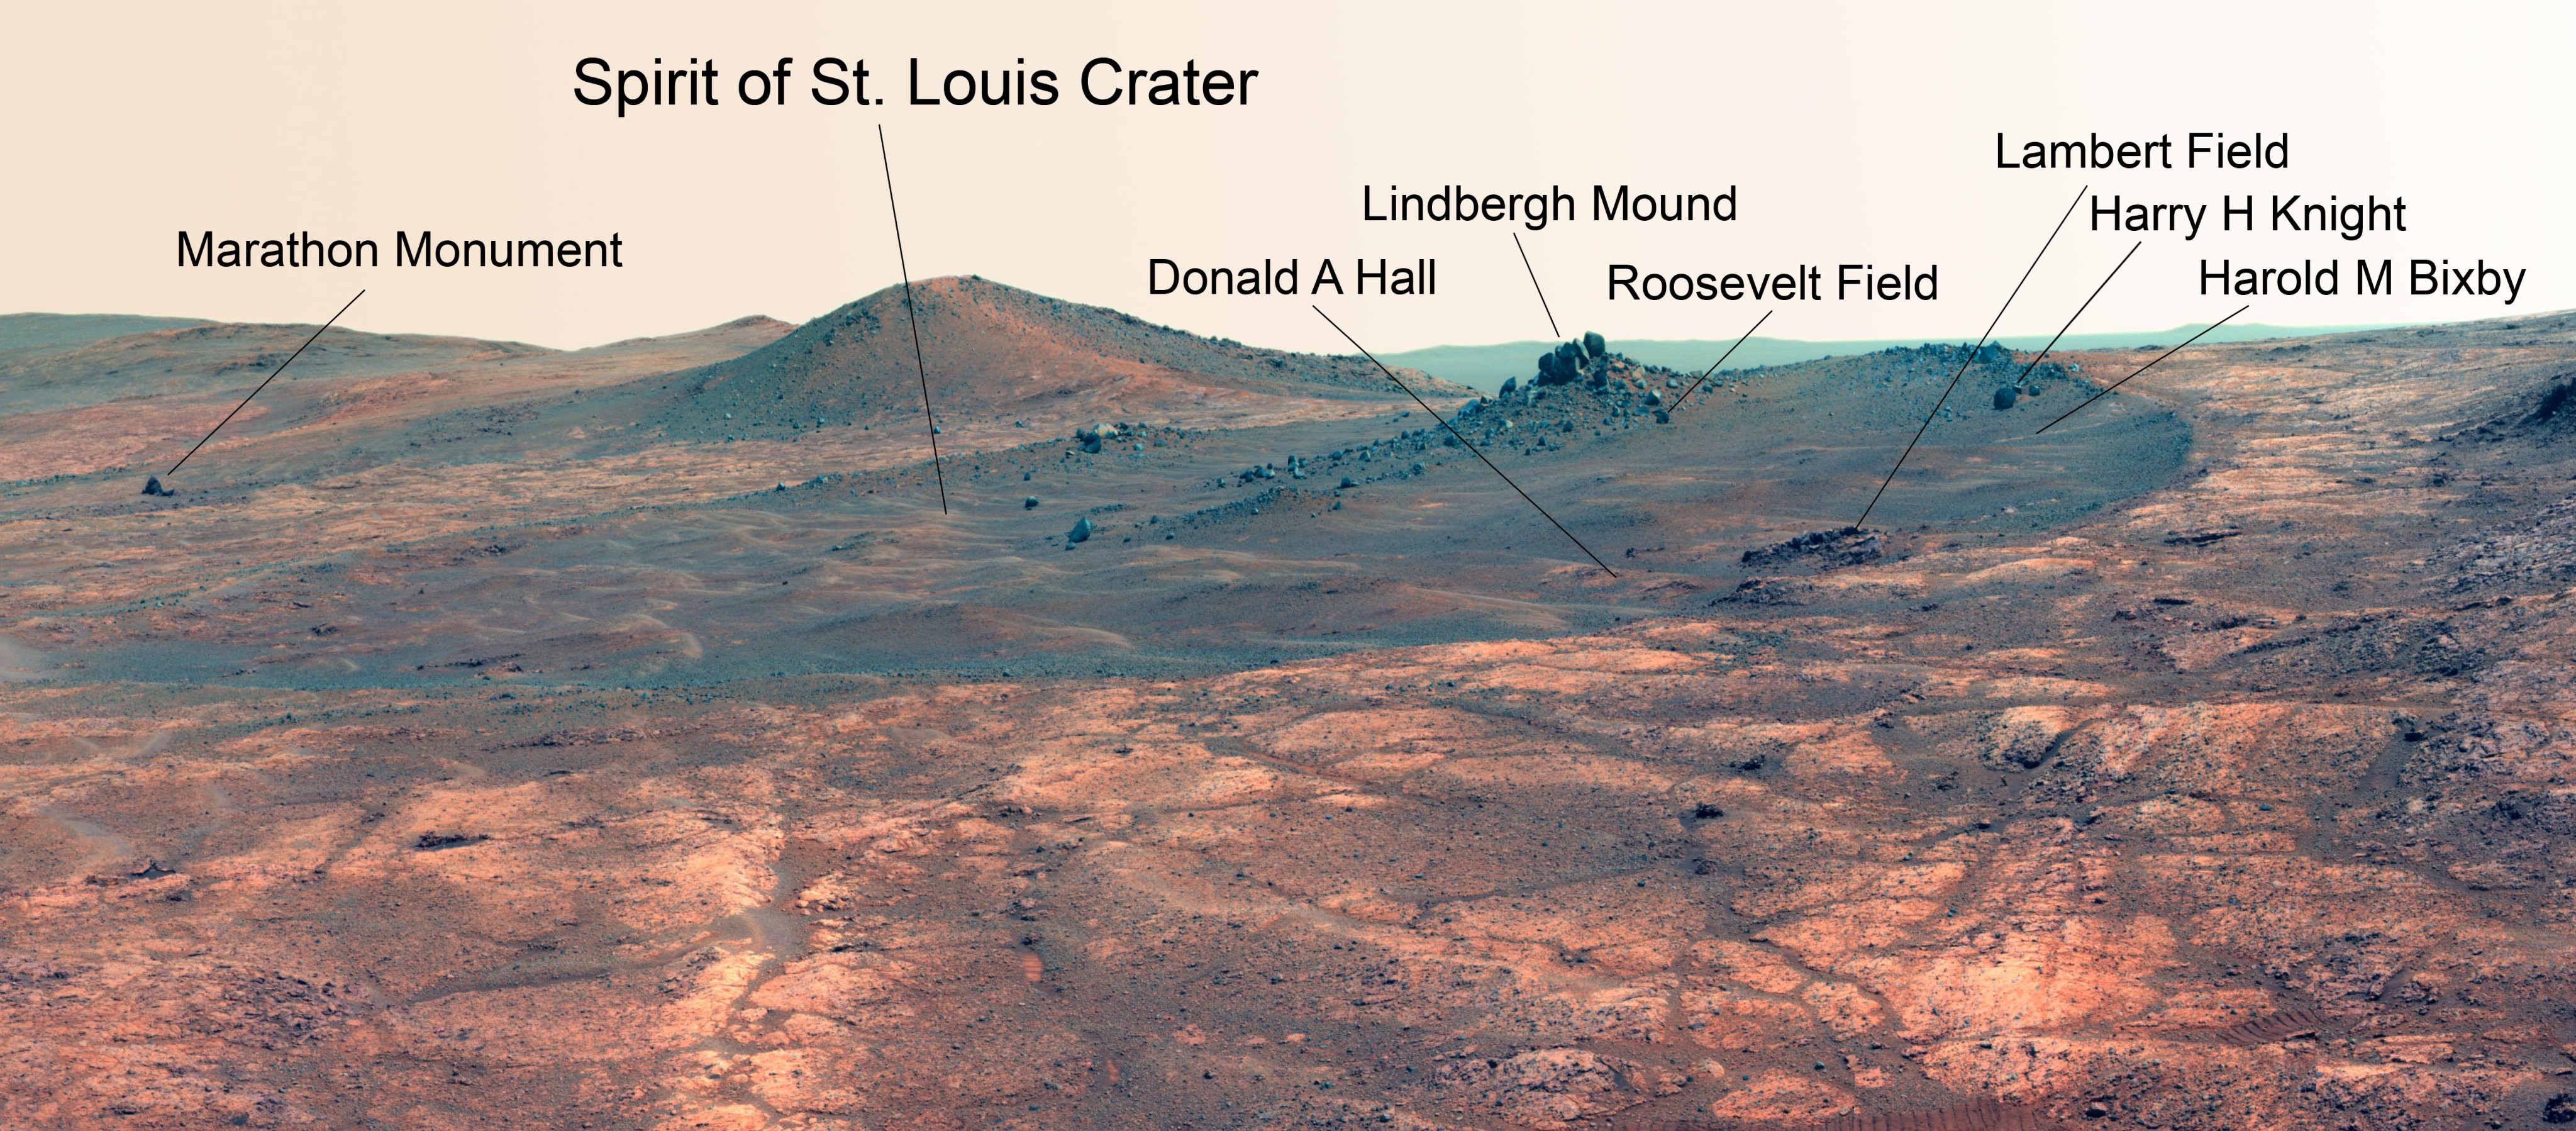 Names related to the first solo nonstop flight across the Atlantic have been informally assigned to a crater NASA's Opportunity Mars rover is studying. This false-color view of the "Spirit of St. Louis Crater" and the "Lindbergh Mound" inside it comes from Opportunity's panoramic camera.